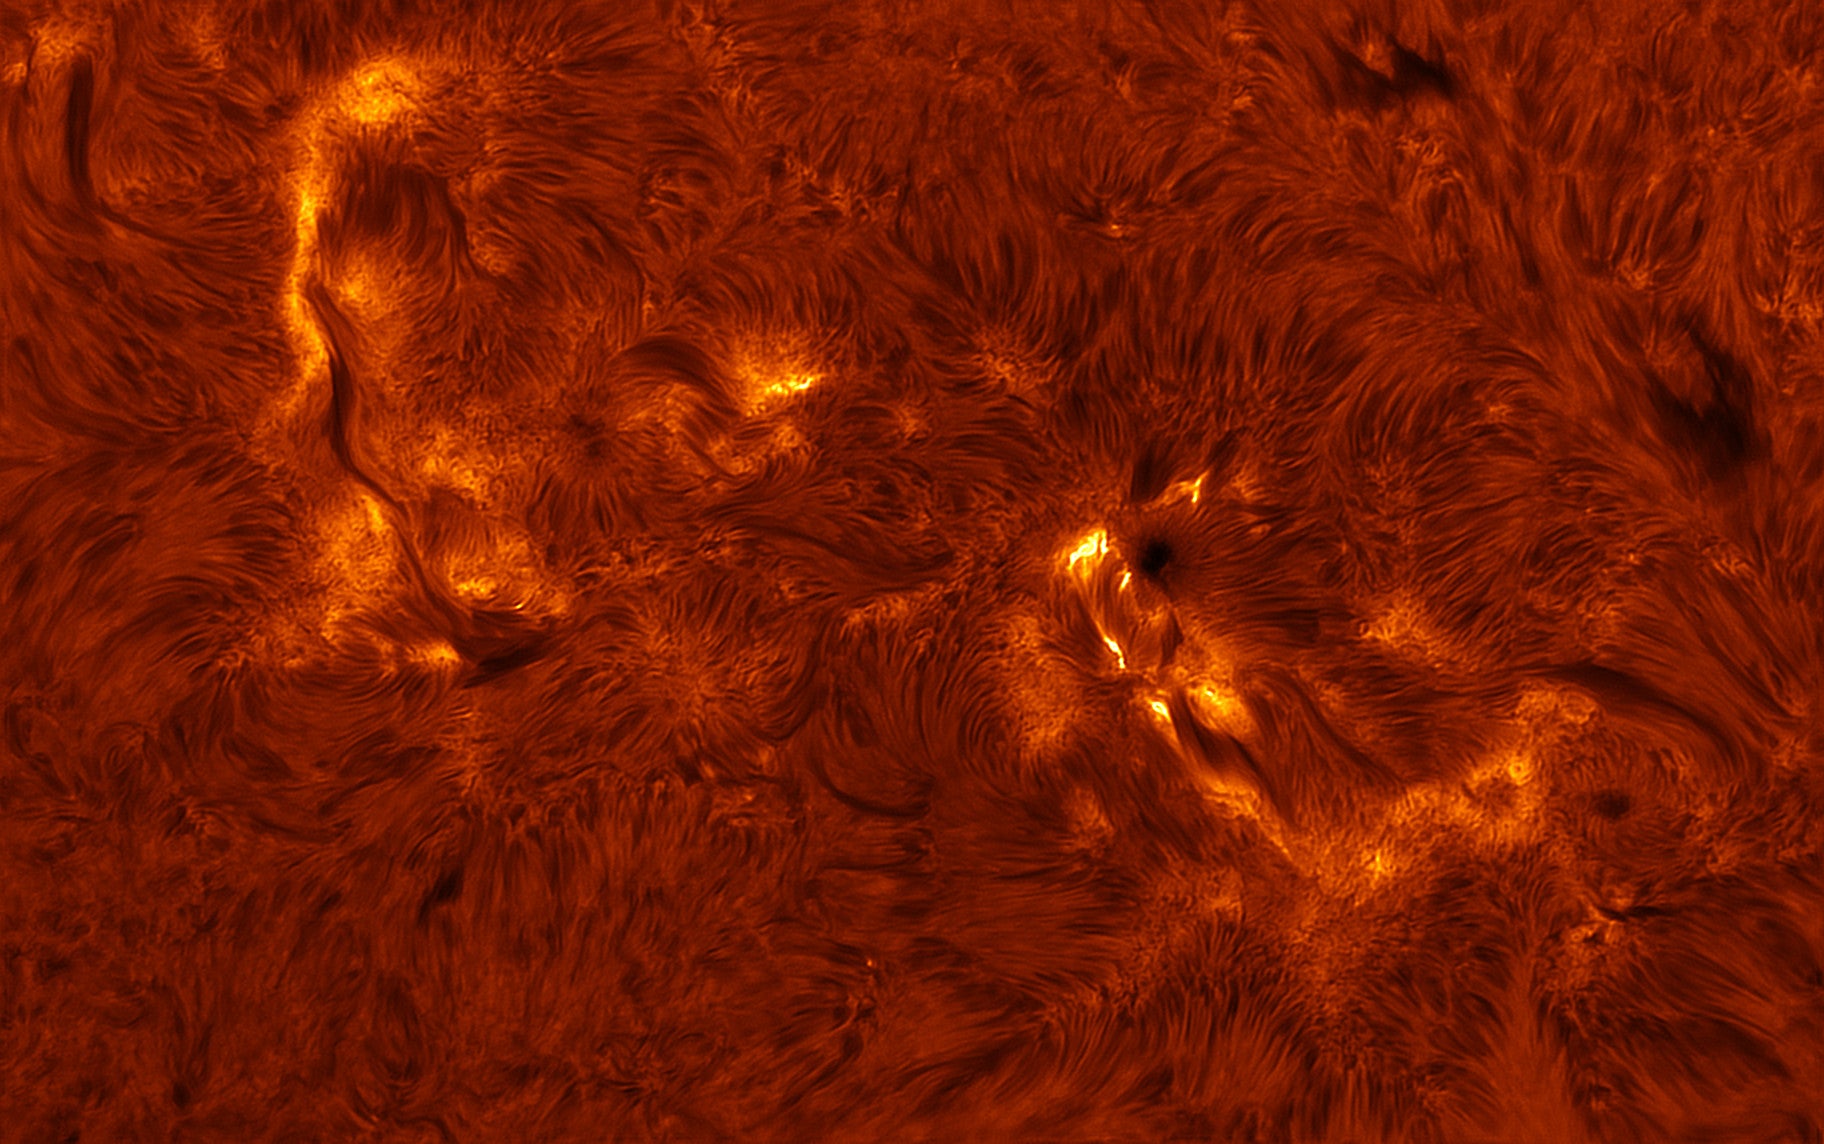 The abstract swirls of the Sun's superheated surface. (Image: © Stuart Green)